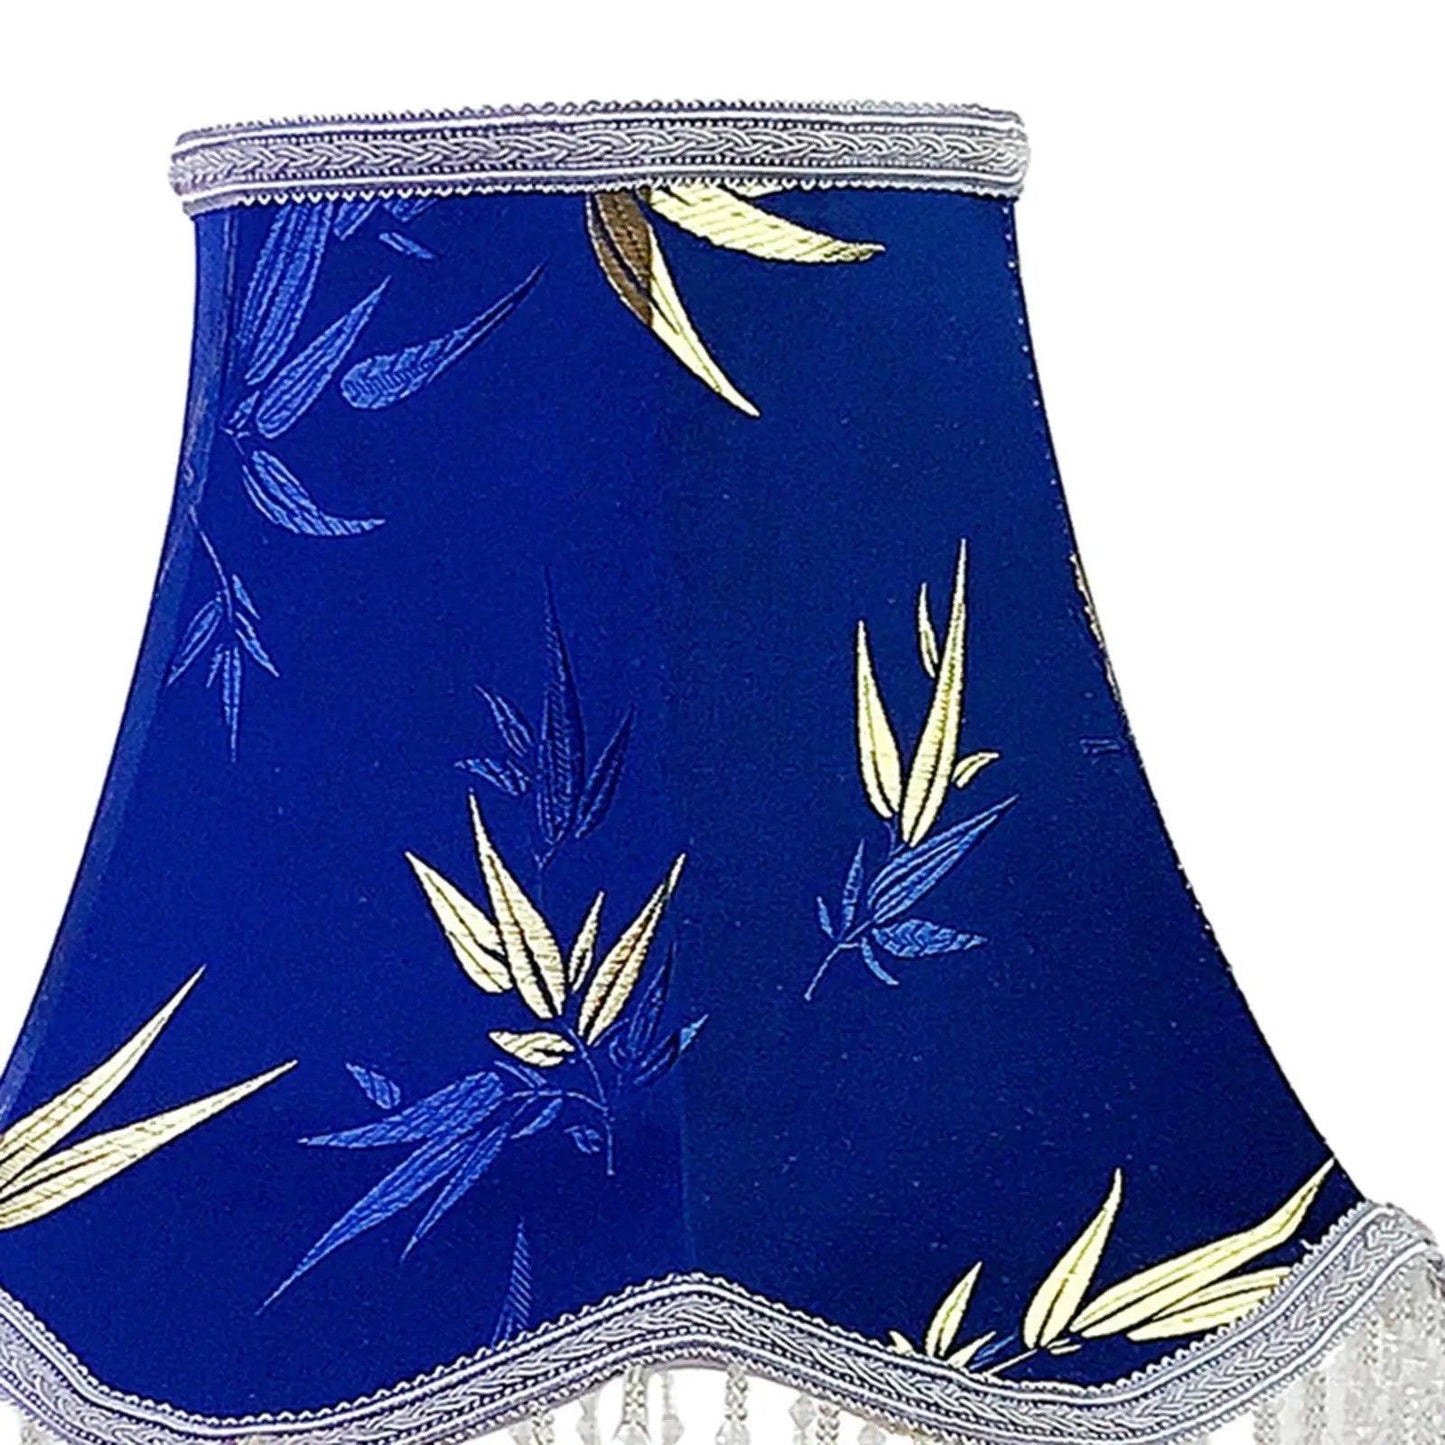 European Lampshade for Pendant Light Shade Lamp Shade with Fringe Beads Lamp - Specialty Shades